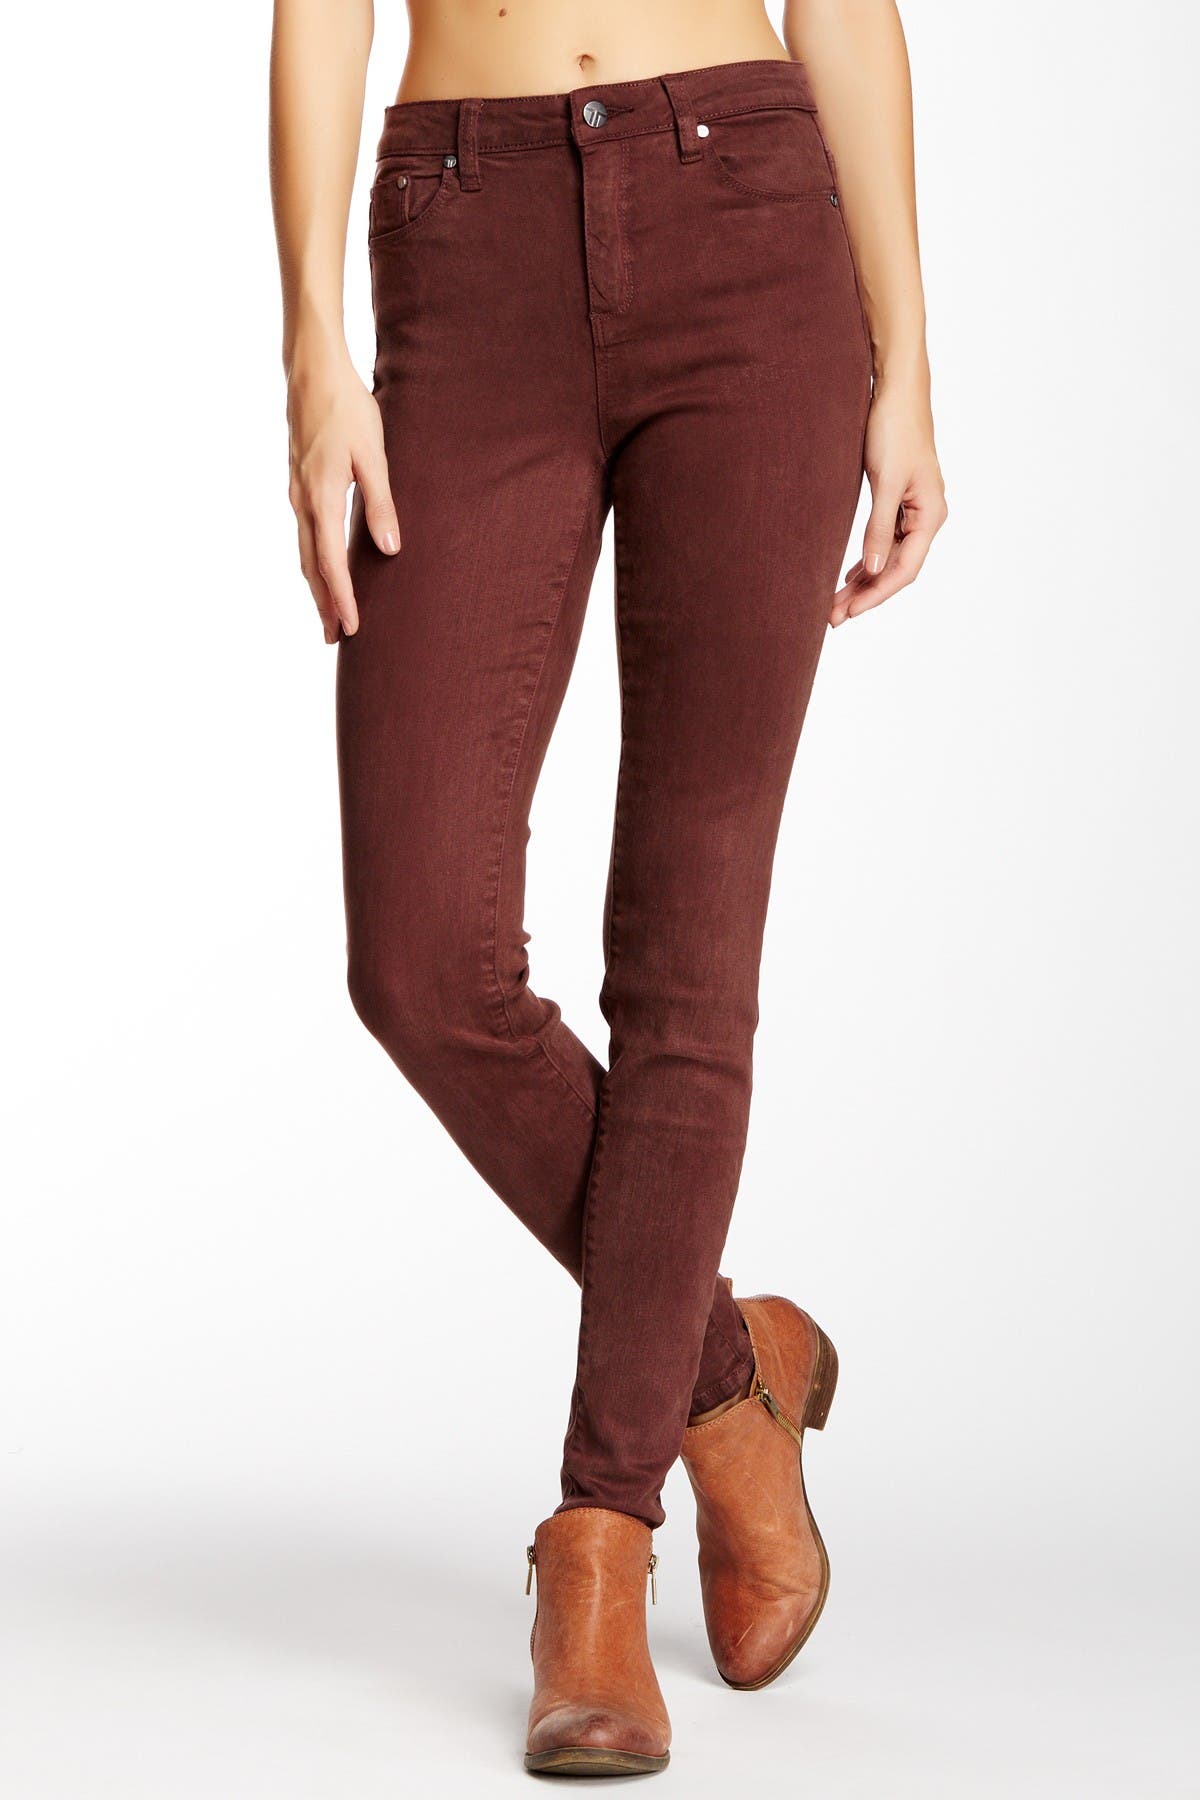 tractr high waist skinny jeans